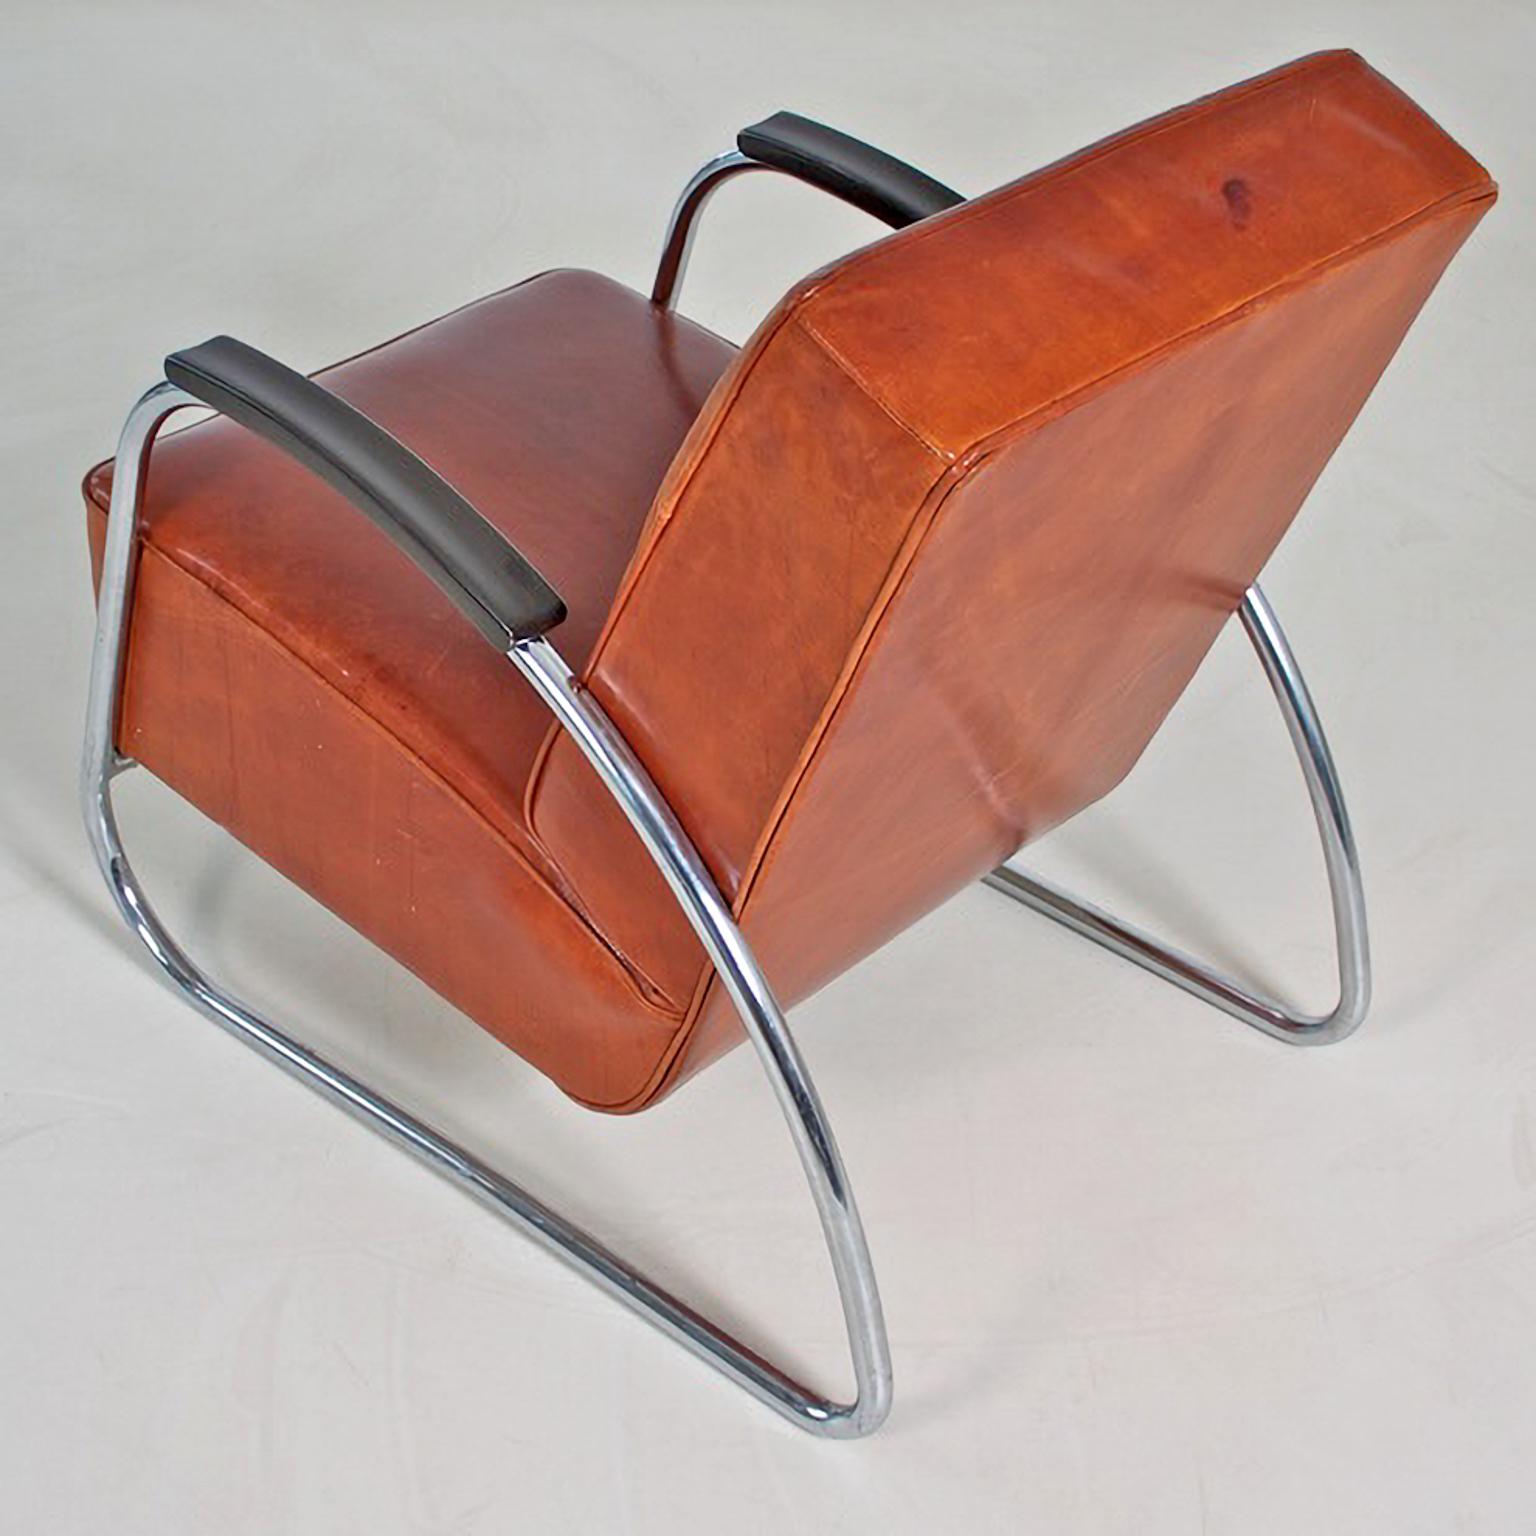 Lacquered Customizable Modernist Club Chair by Mauser, Chromed Metal, Leather Upholstery For Sale